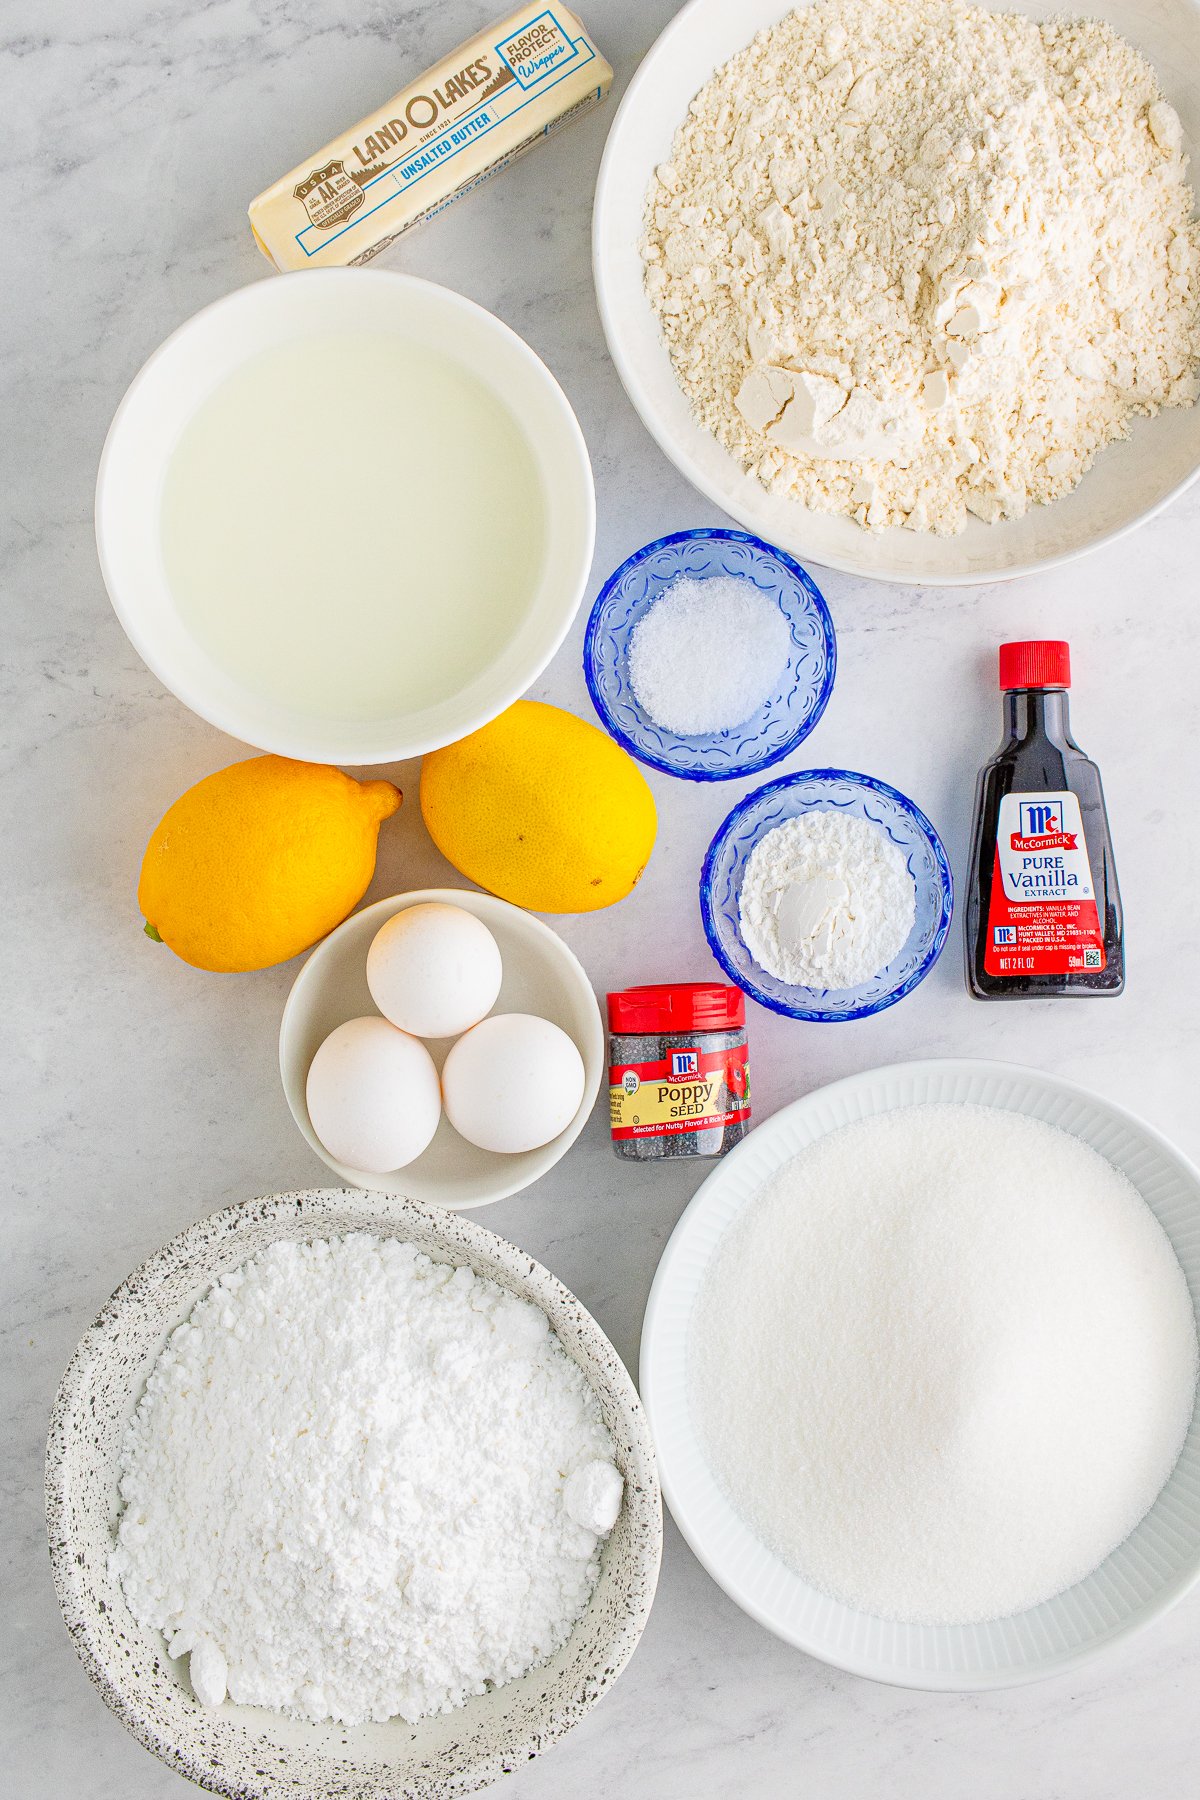 Ingredients needed to make a Lemon Poppy Seed Cake